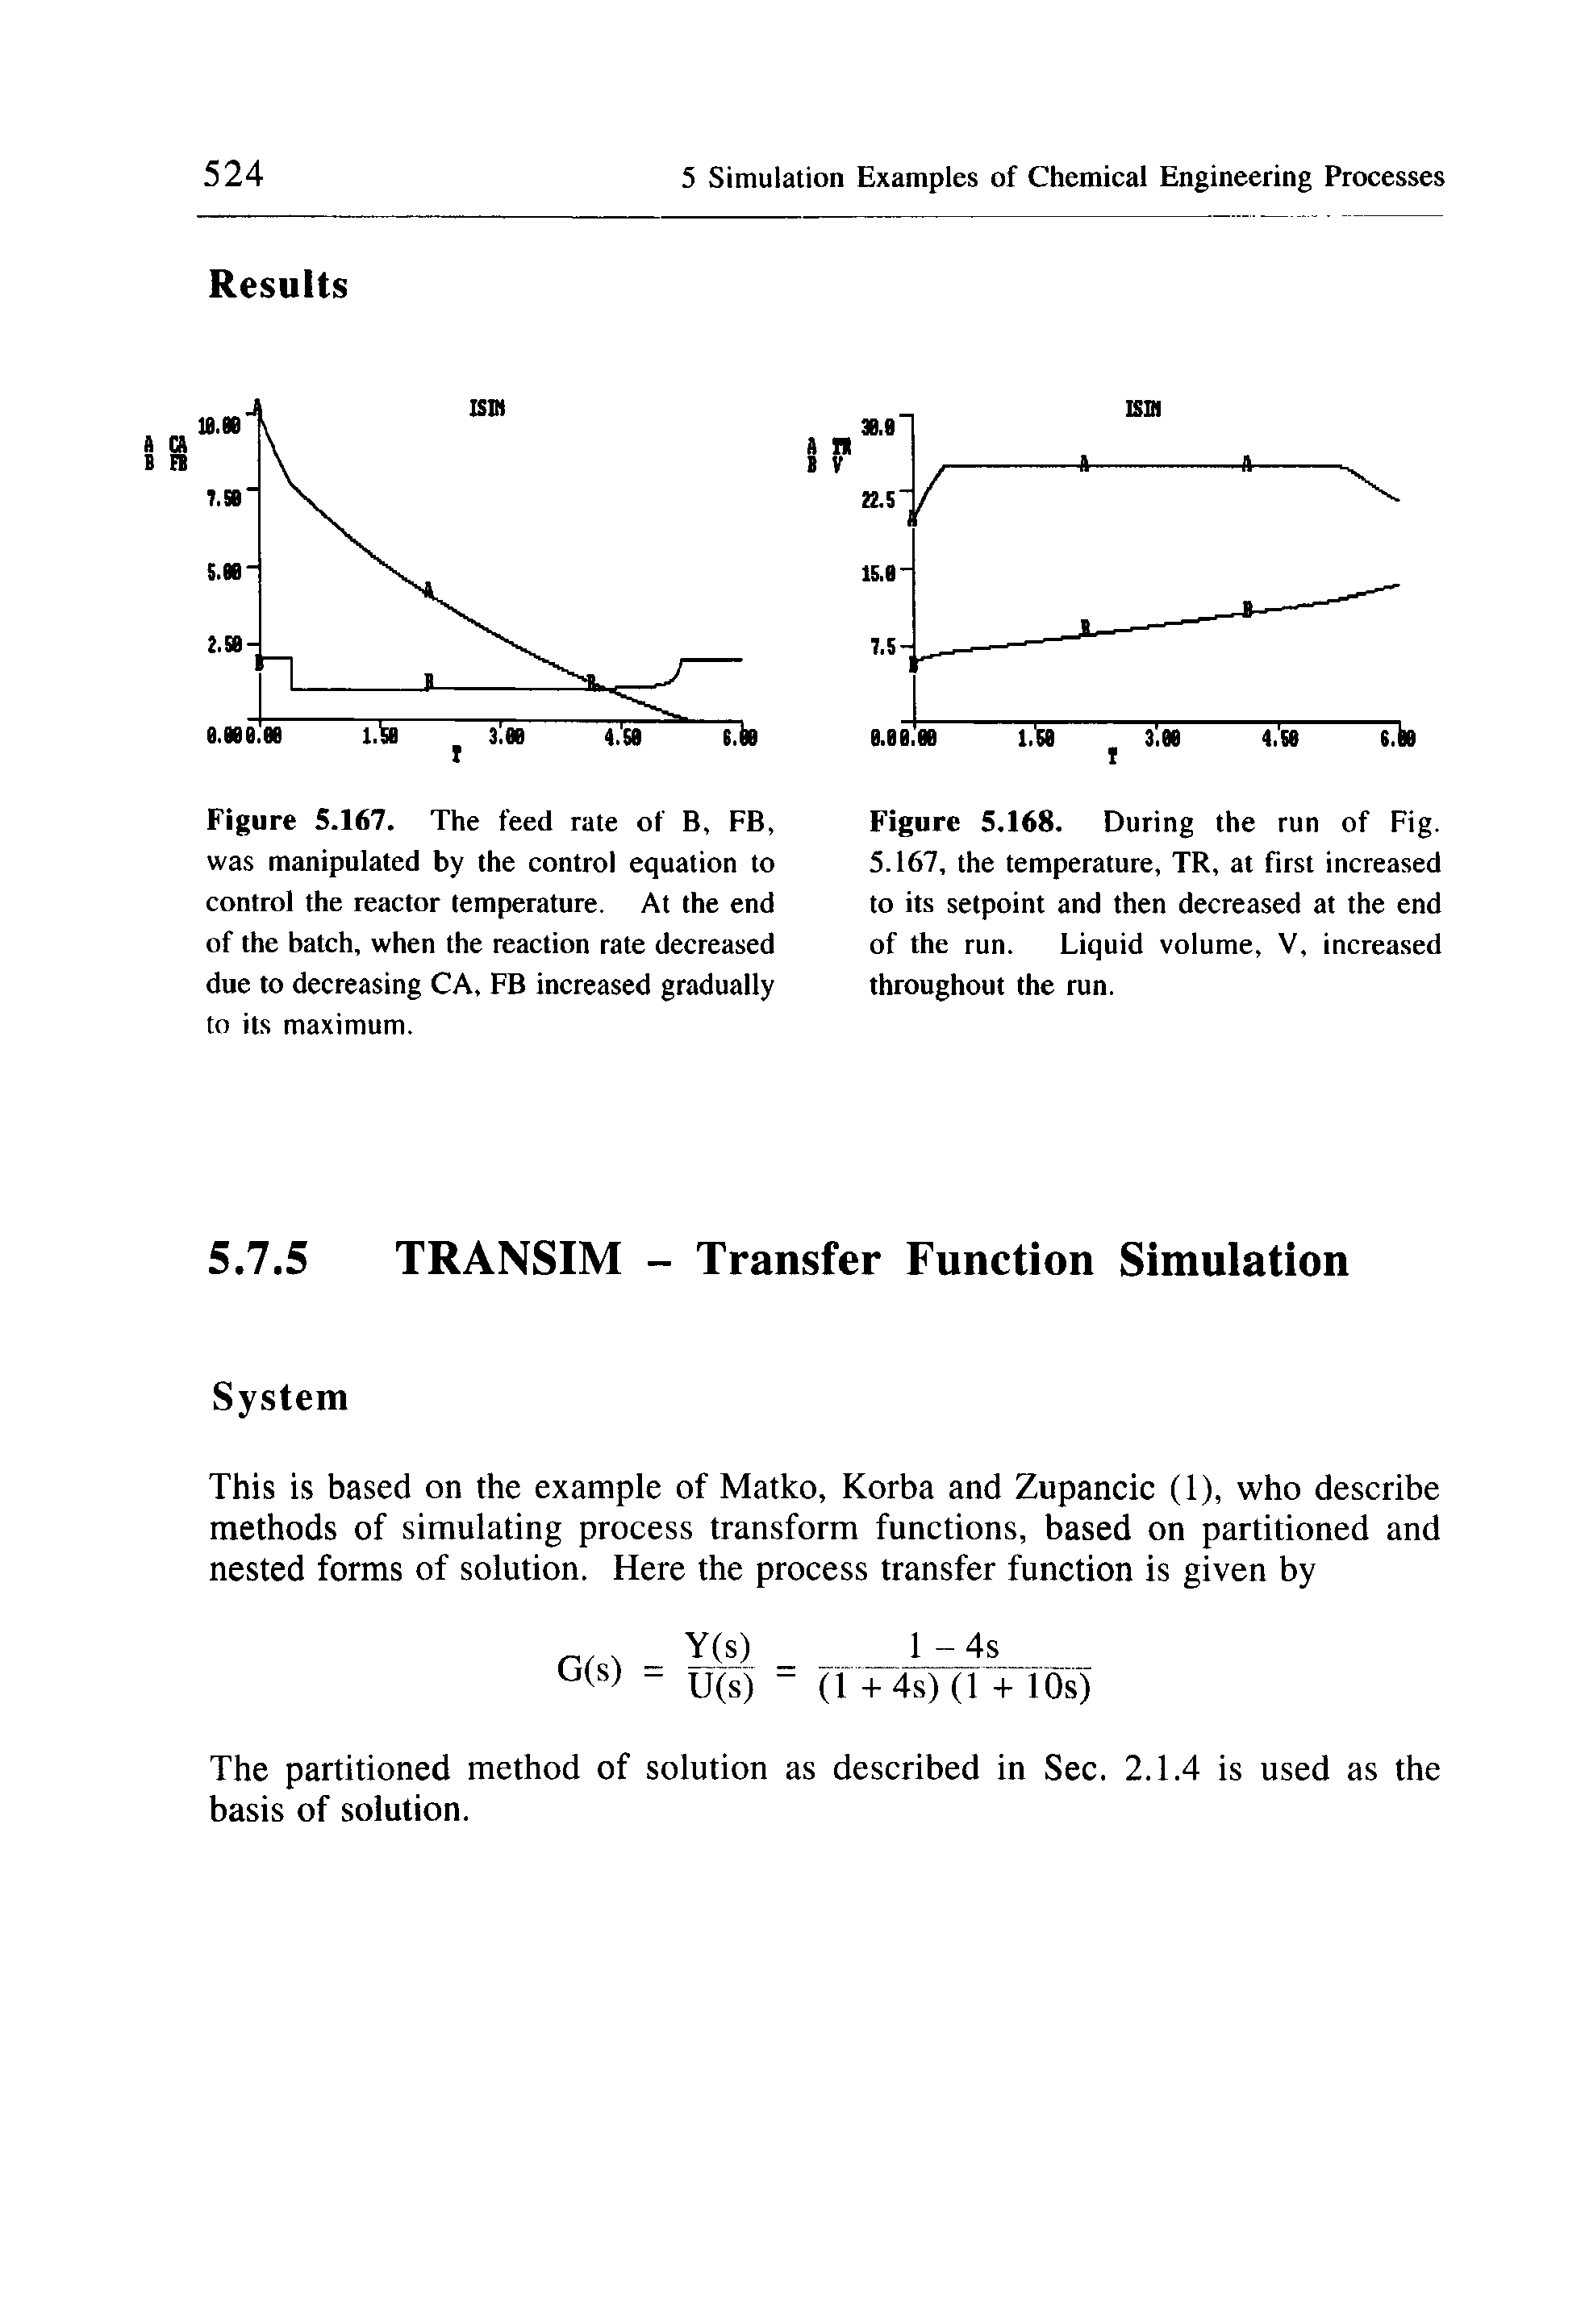 Figure 5.167. The feed rate of B, FB, was manipulated by the control equation to control the reactor temperature. At the end of the batch, when the reaction rate decreased due to decreasing CA, FB increased gradually to its maximum.